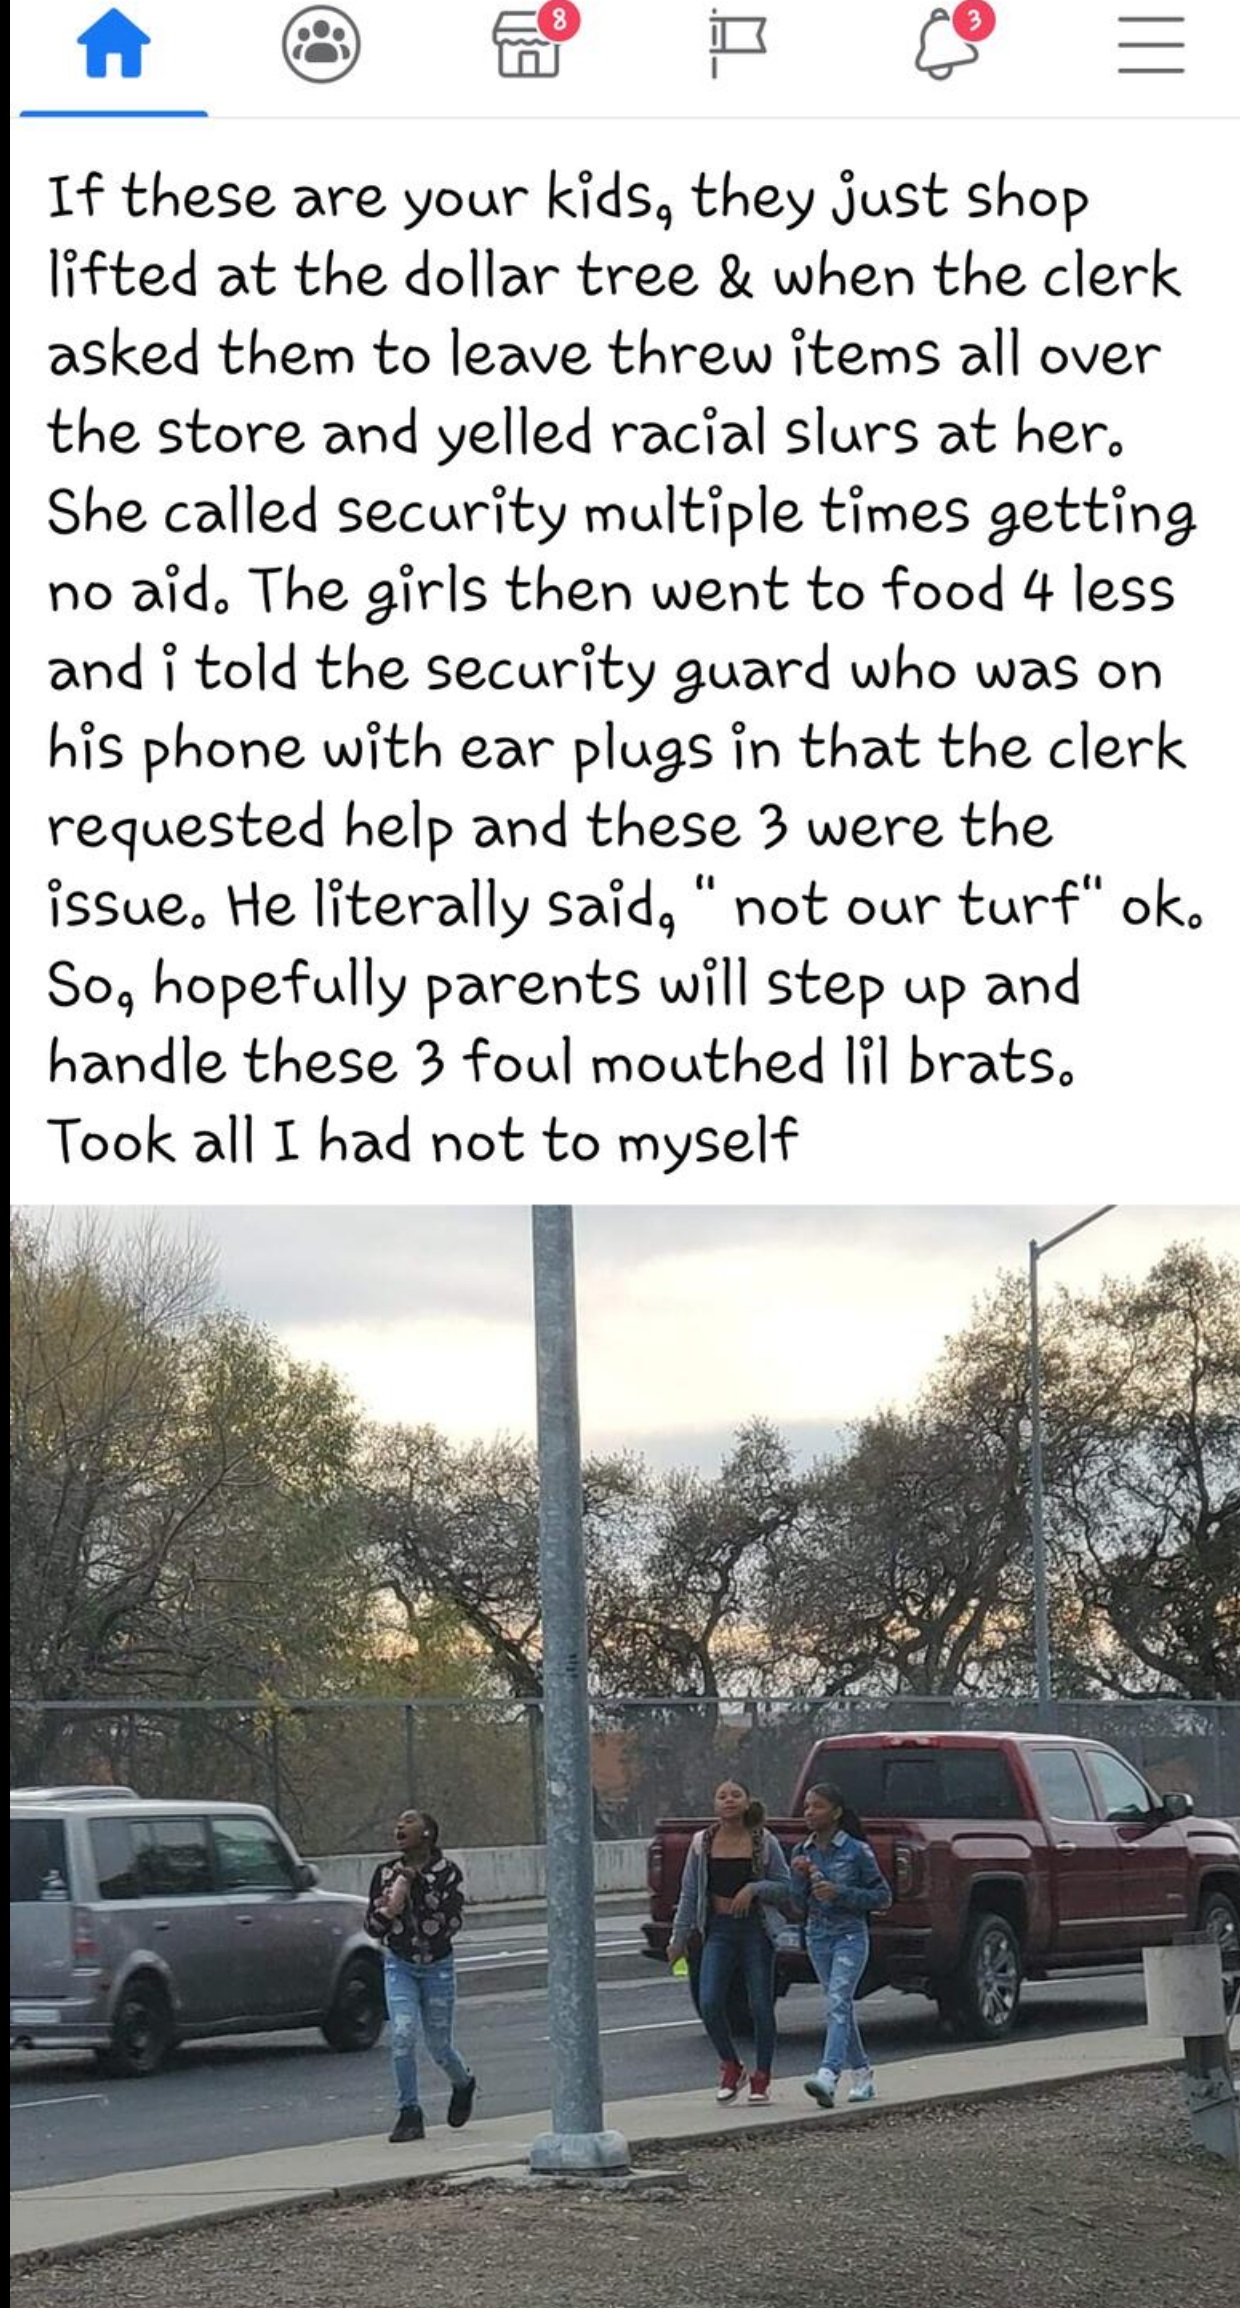 tree - If these are your kids, they just shop lifted at the dollar tree & when the clerk asked them to leave threw items all over the store and yelled racial slurs at her. She called security multiple times getting no aid. The girls then went to food 4 le